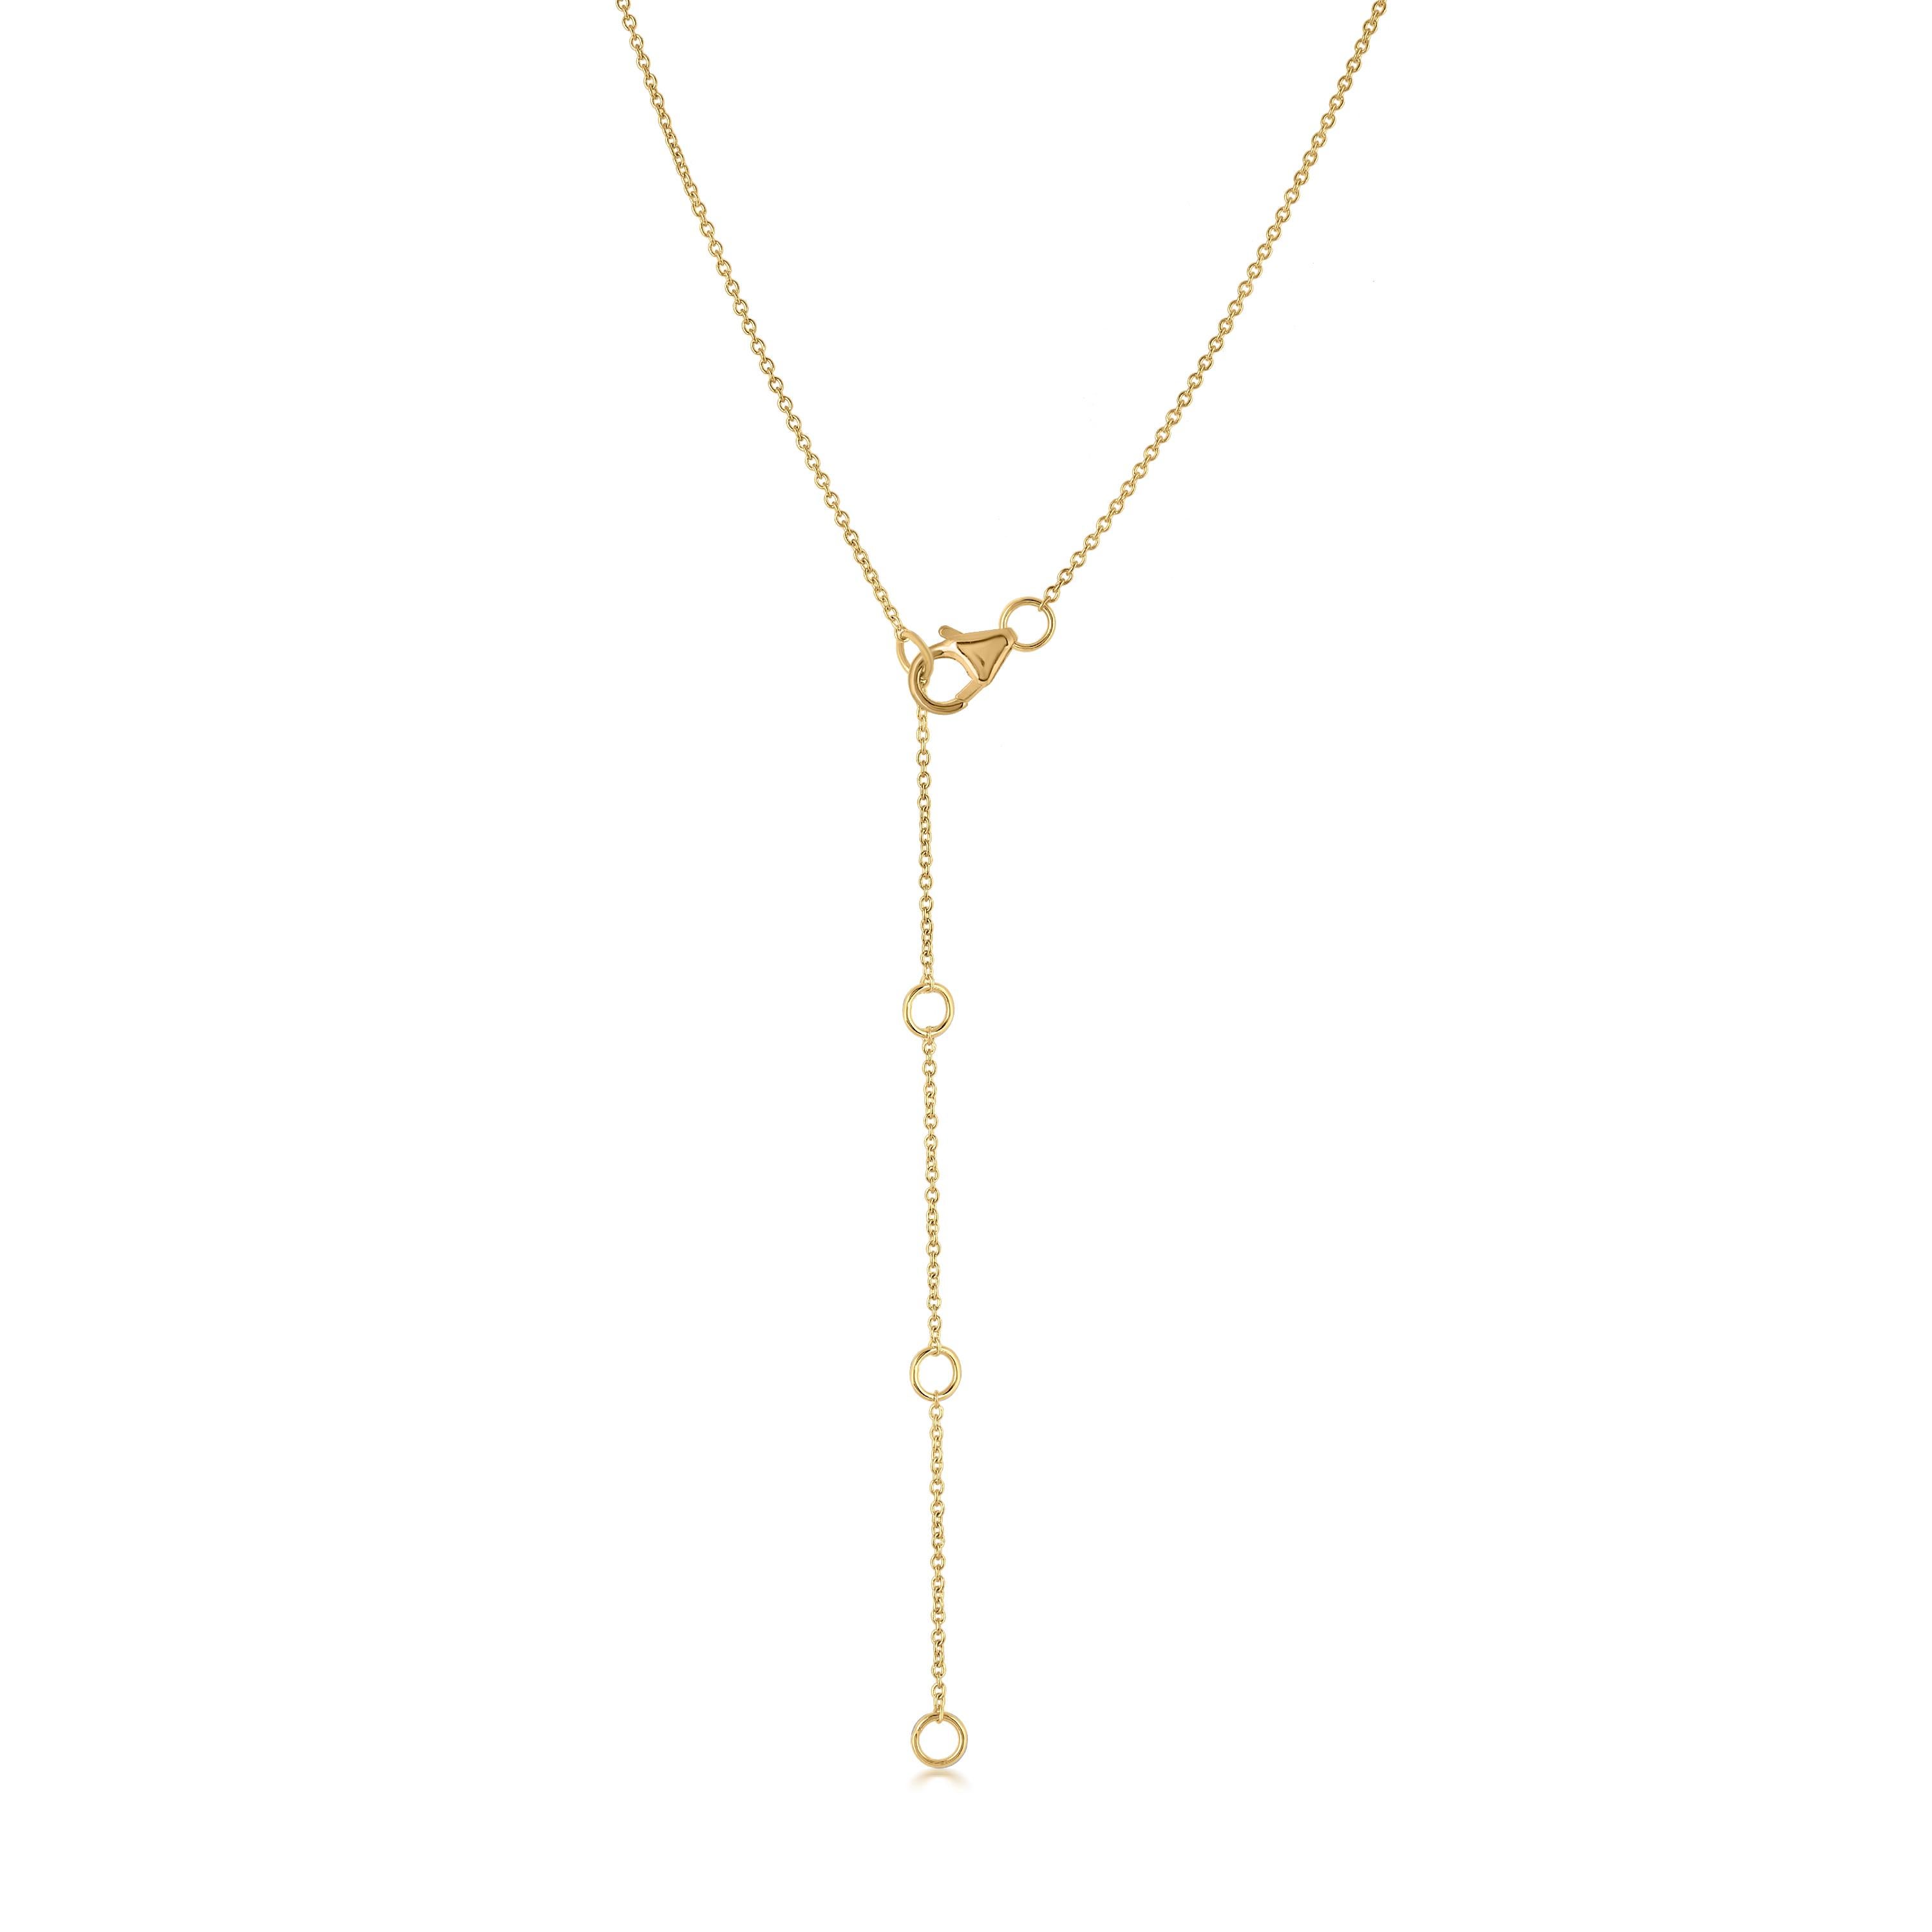 Luxle 1/5 Carat T.W. Round Diamond Bar Necklace in 14k Yellow Gold In New Condition For Sale In New York, NY